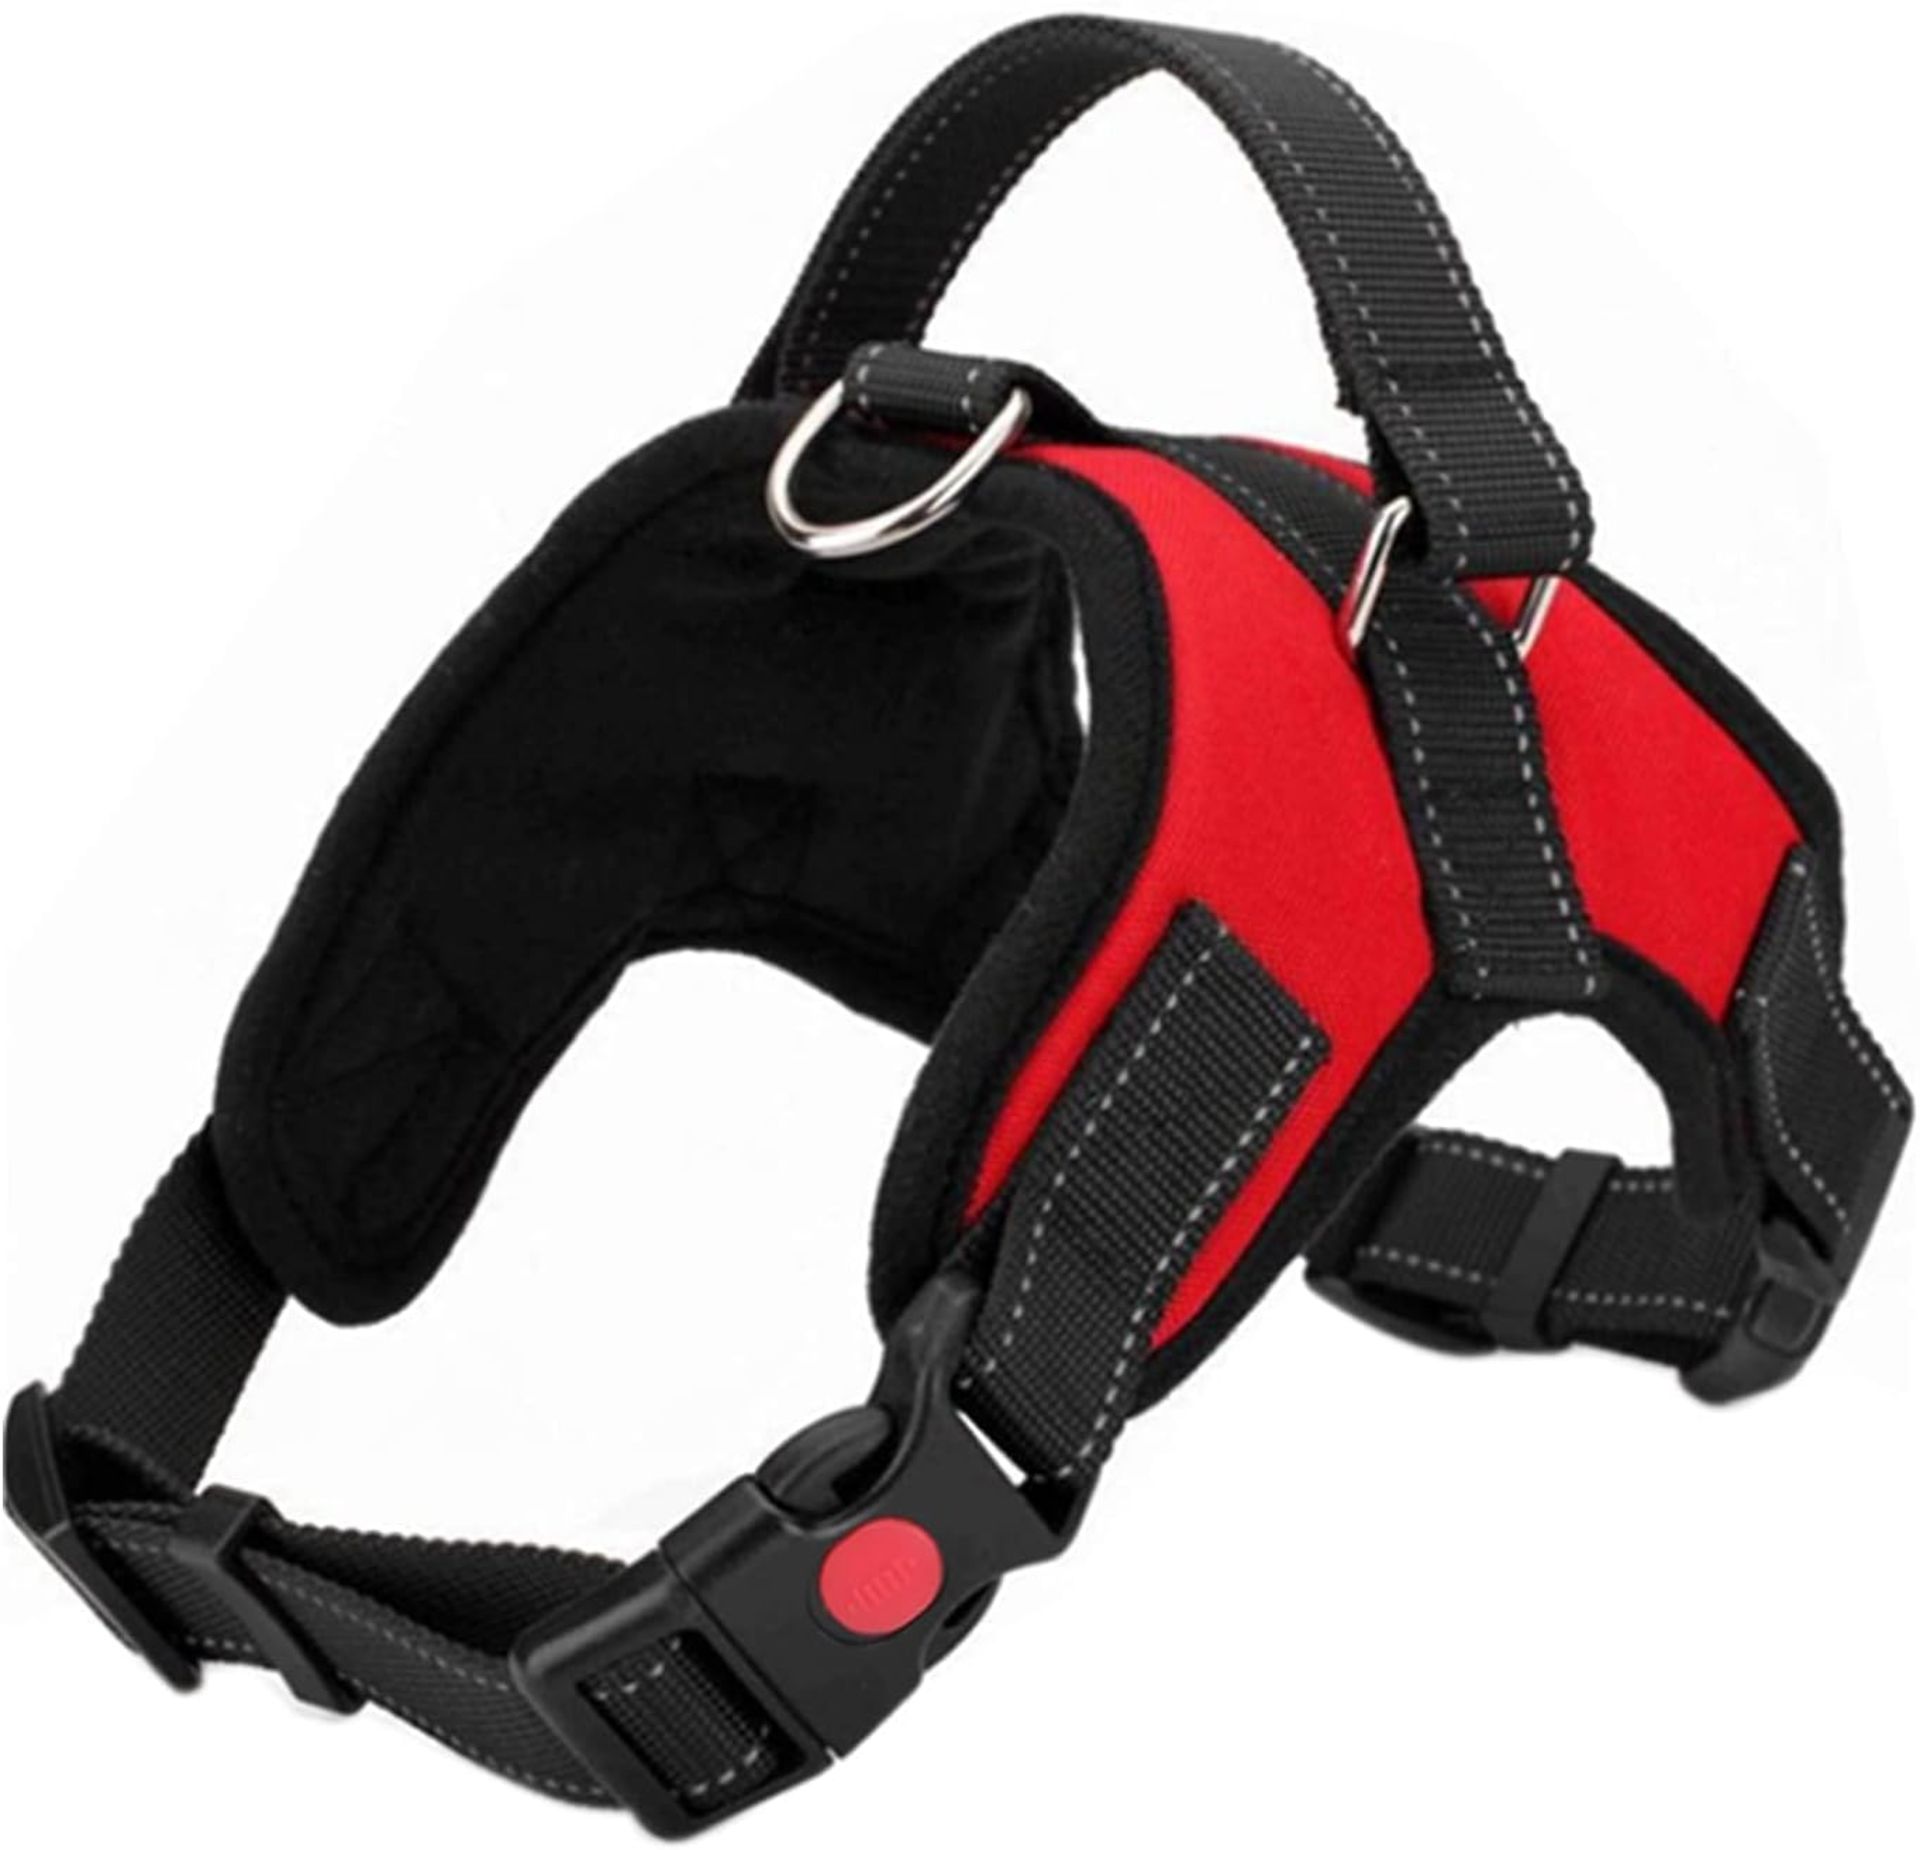 JOBLOT DOG HARNESS STRONG MIXED SIZES AND COLORS 300 PCS - Image 6 of 7